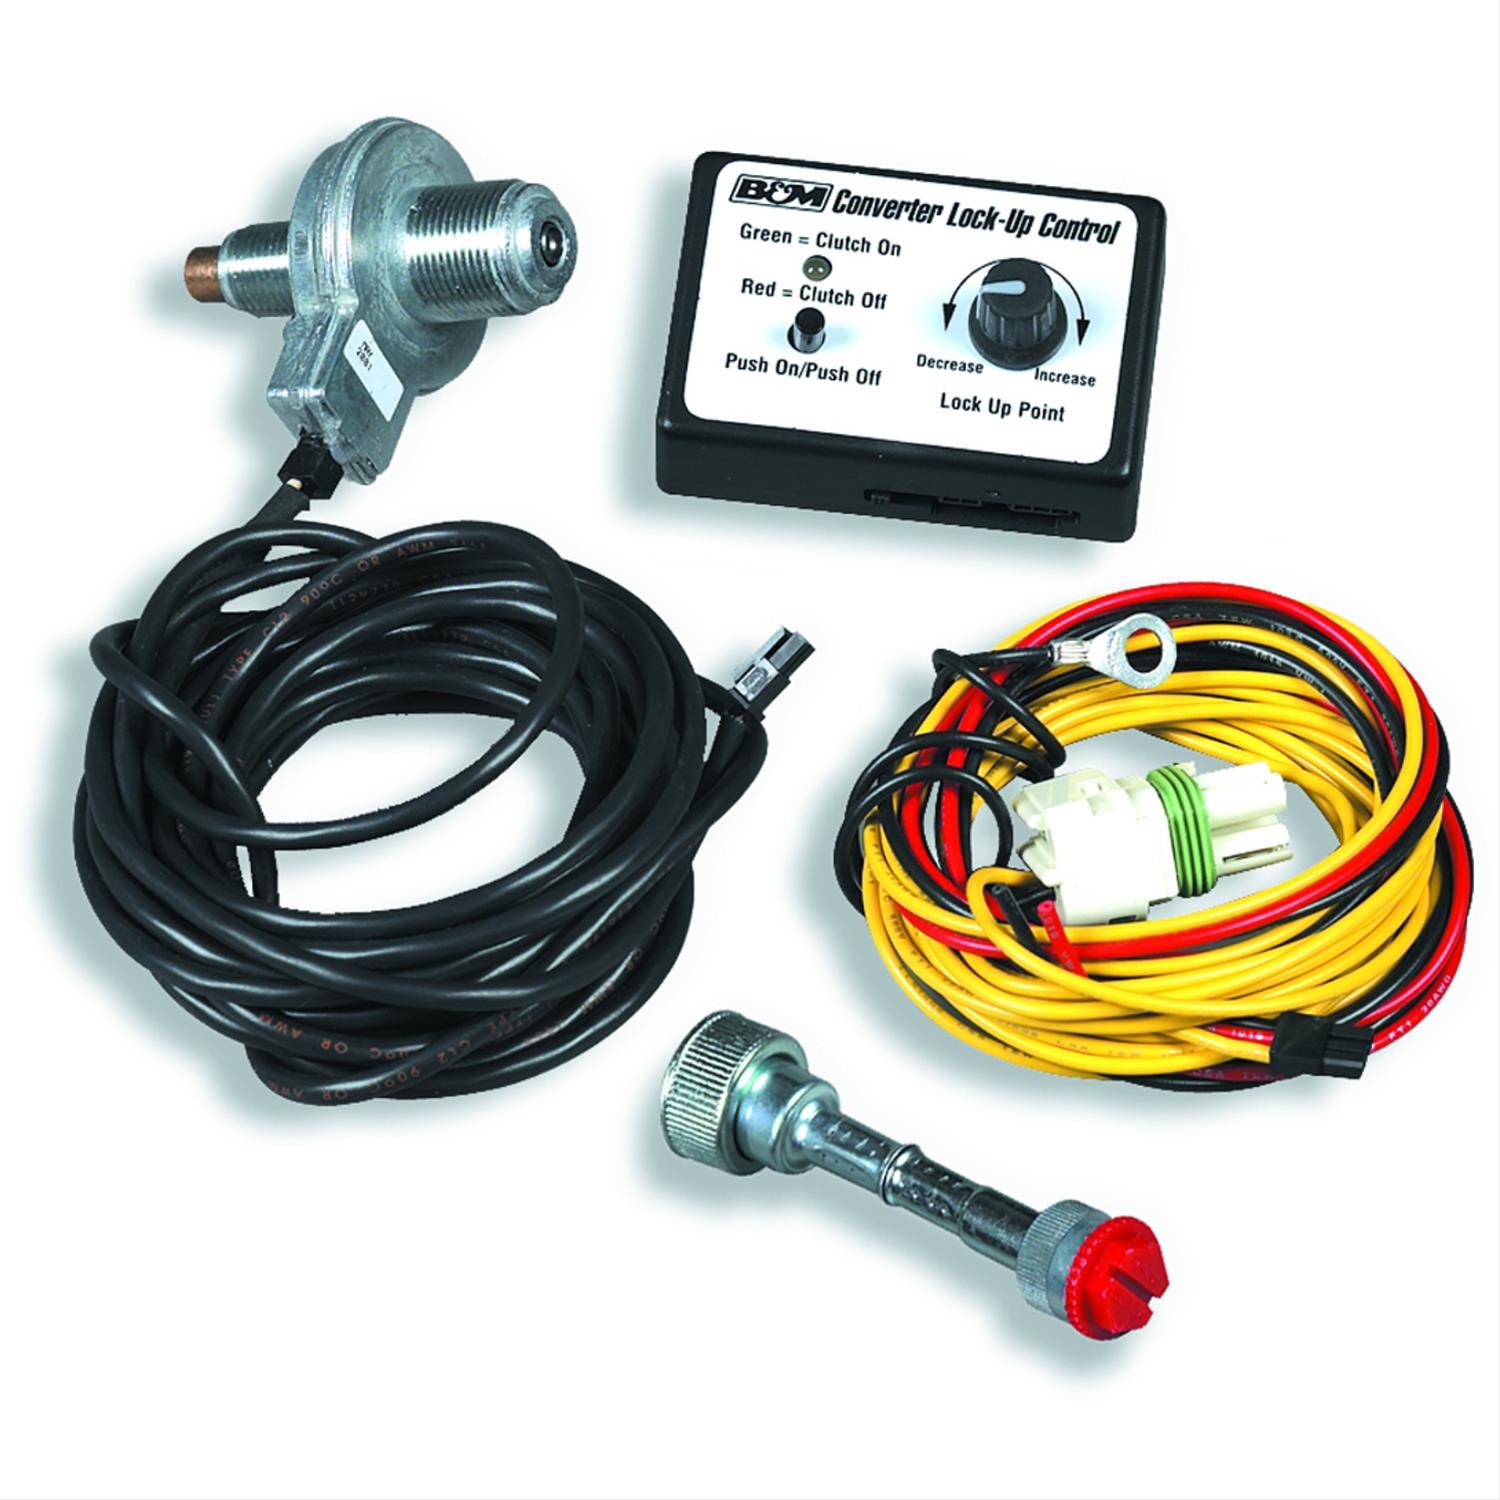 Dash Mounted Converter Lockup Controller GM 700R4/TH350C/4L60/200-4R Automatic Transmissions